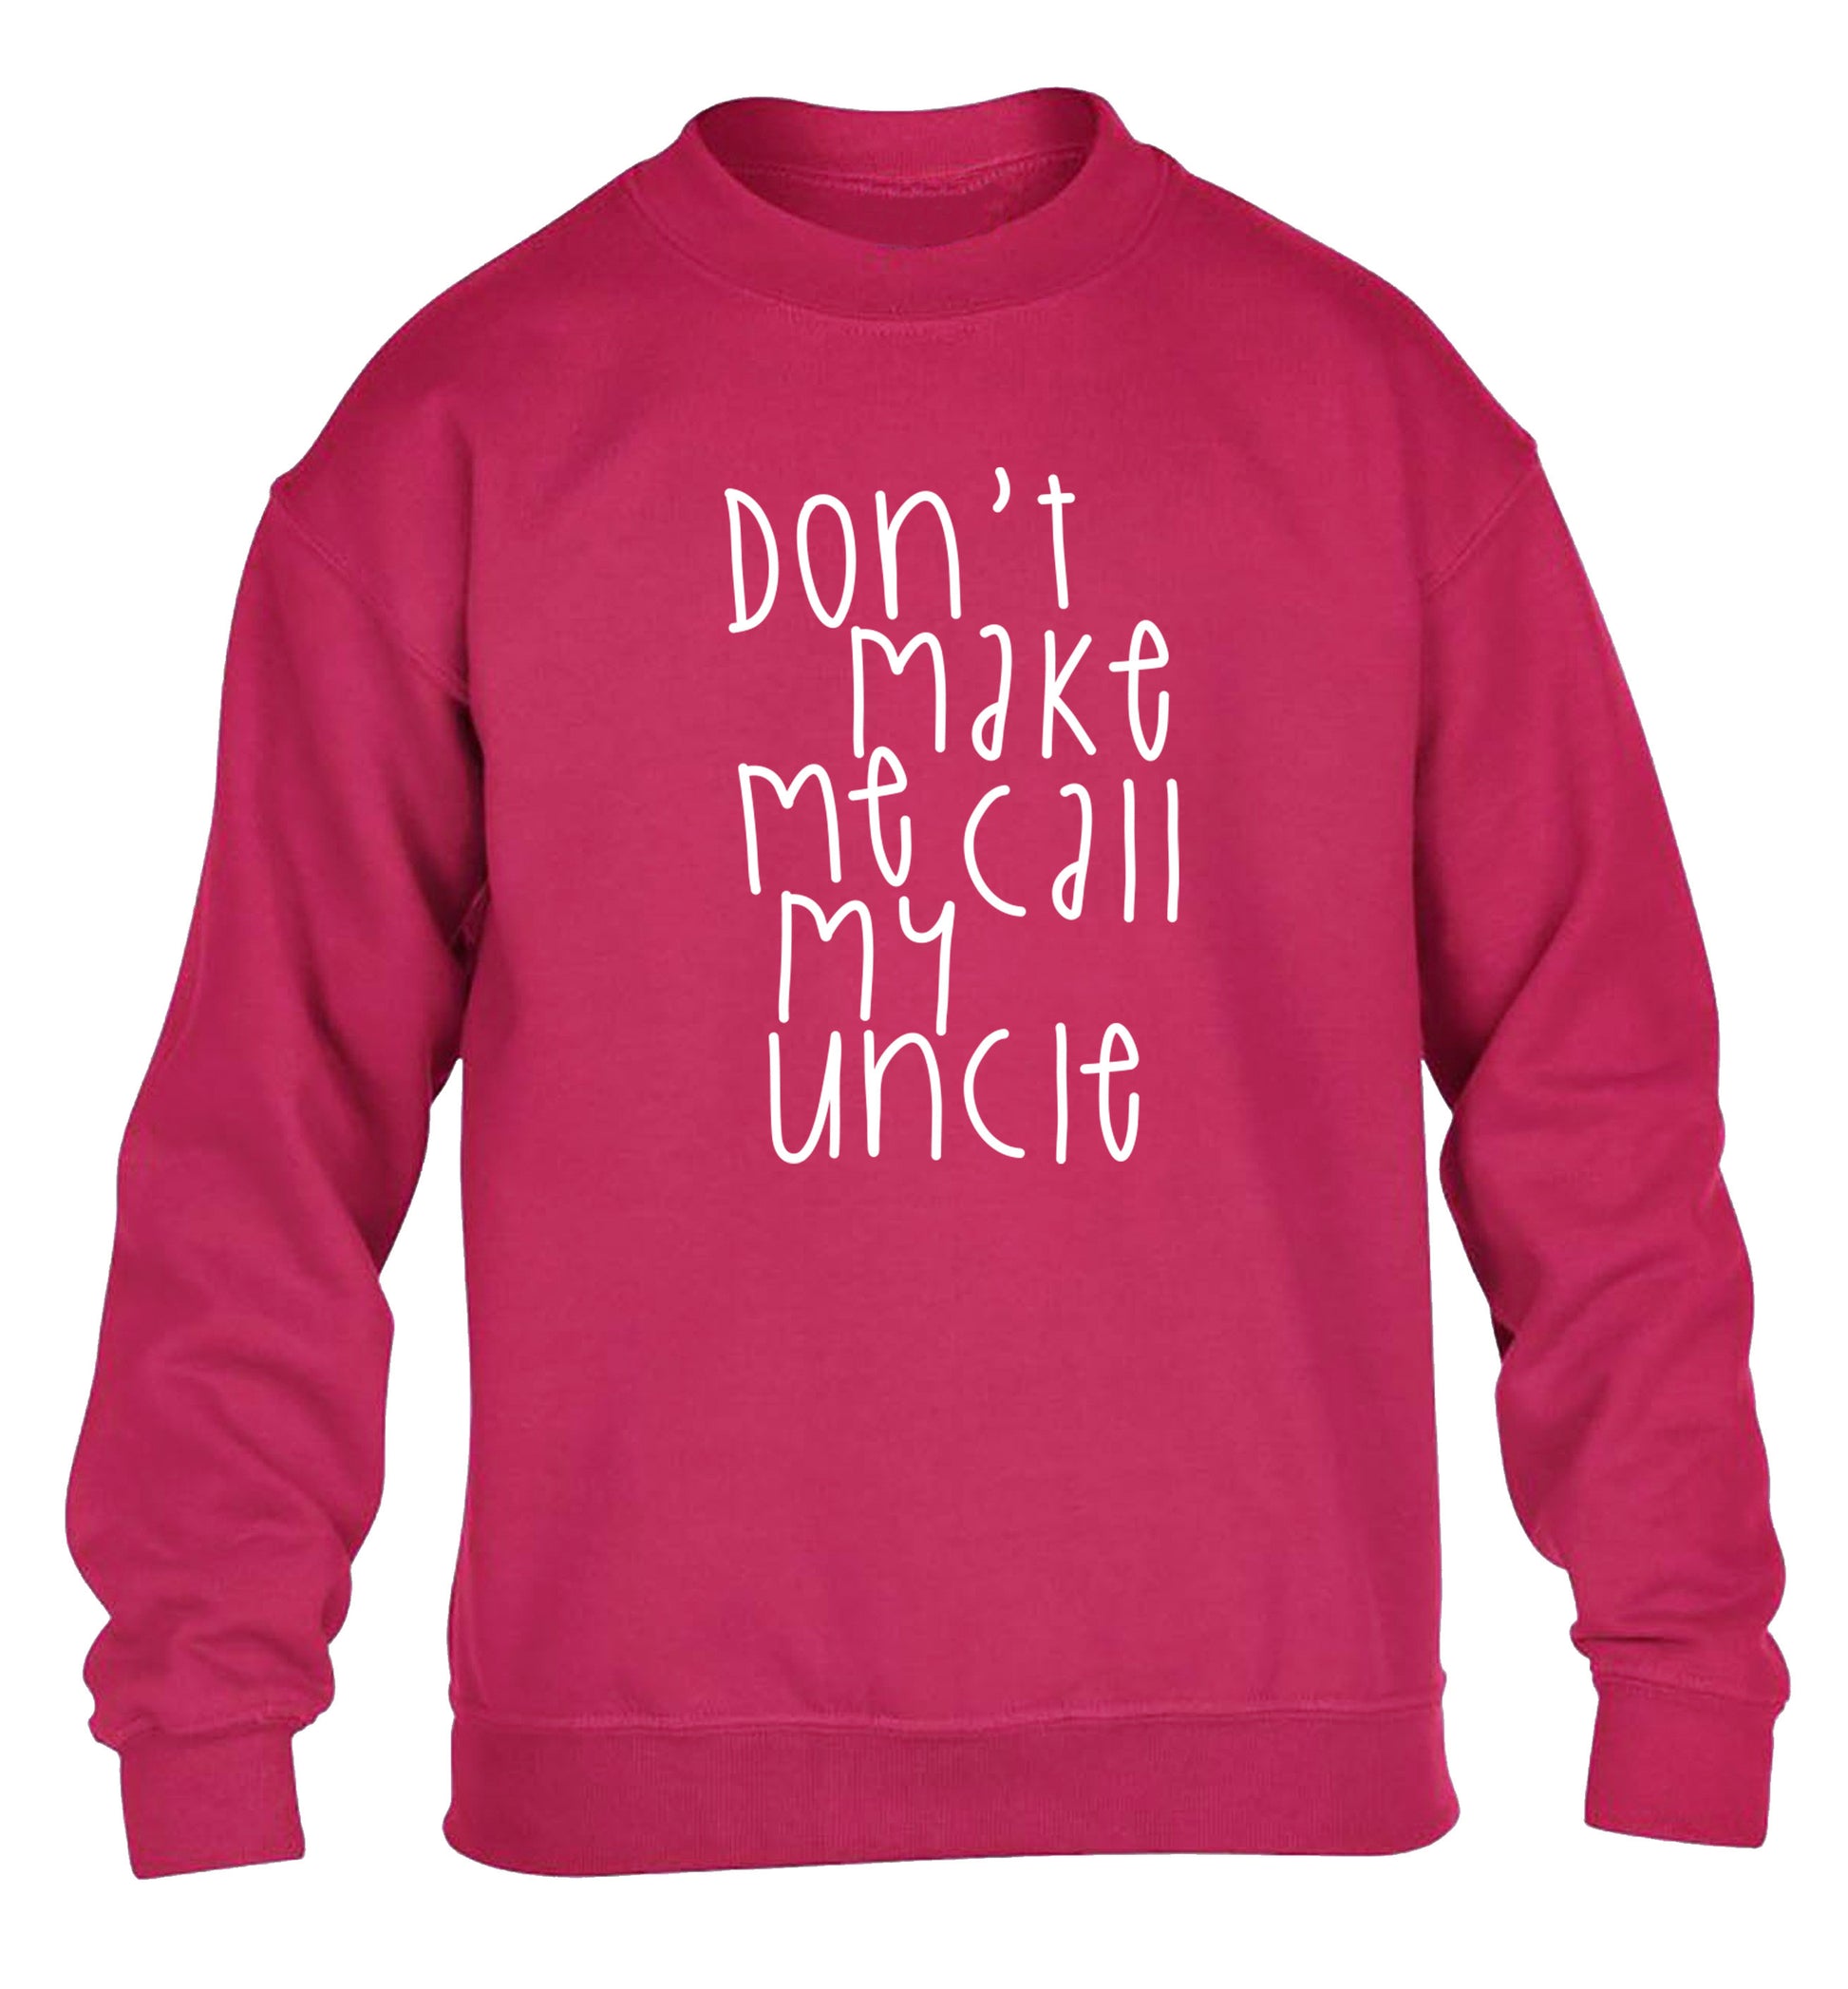 Don't make me call my uncle children's pink sweater 12-14 Years